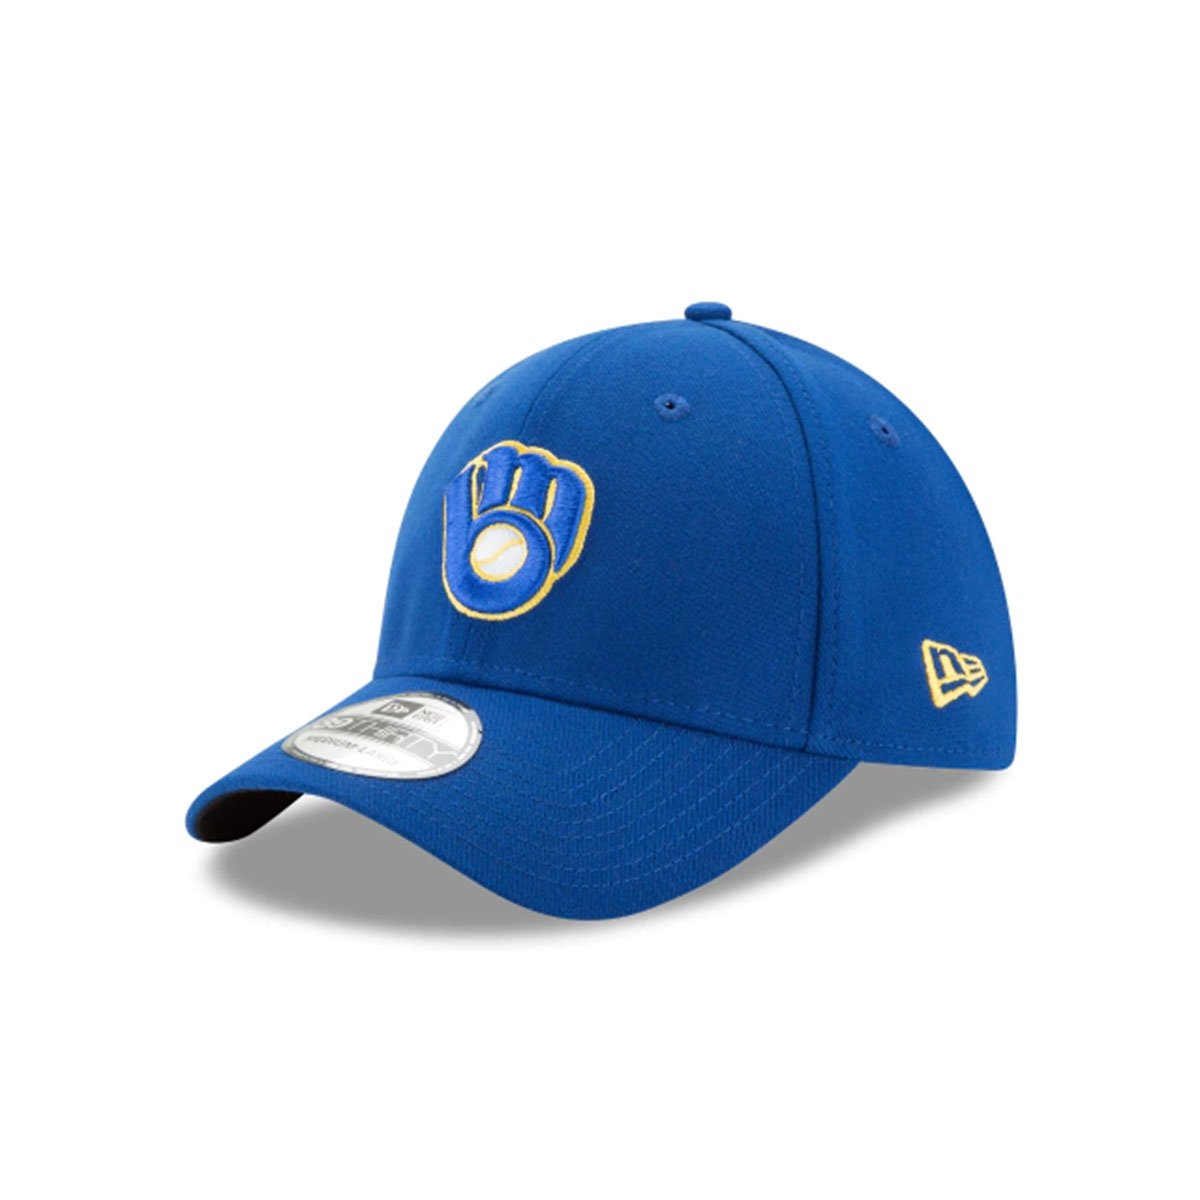 MILWAUKEE BREWERS 39THIRTY STRETCH FIT BLUE/YELLOW